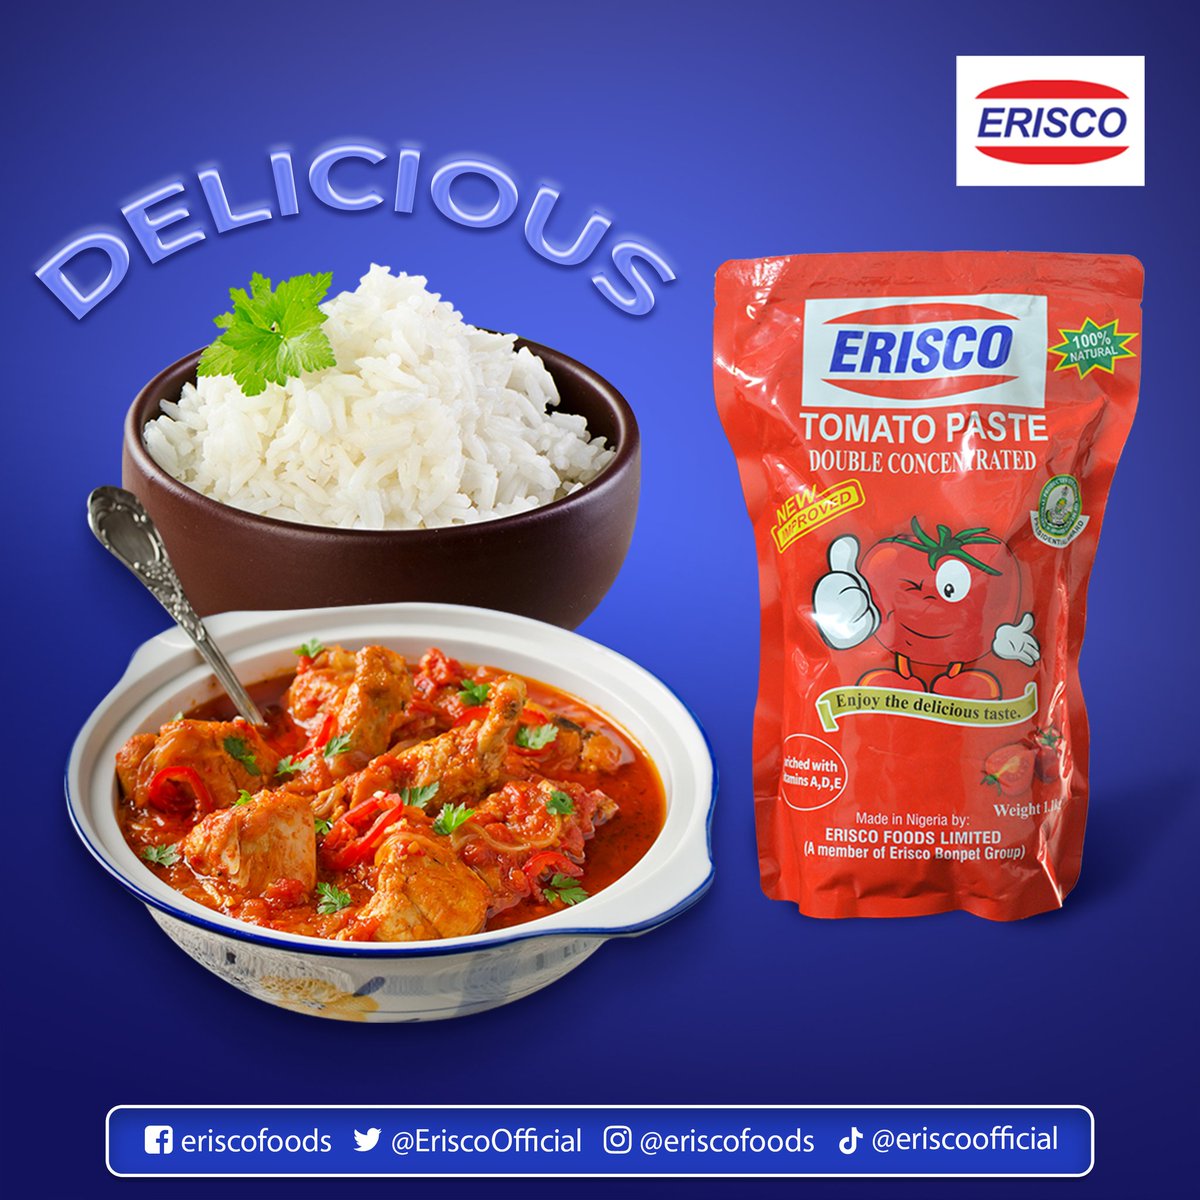 Erisco tomato paste is the perfect choice! Our paste is packed with nutrients from the first drop to the last, delivering rich flavor in every spoonful. Try Erisco tomato paste today and experience the satisfaction of a delicious and healthy meal! #EriscoFoods